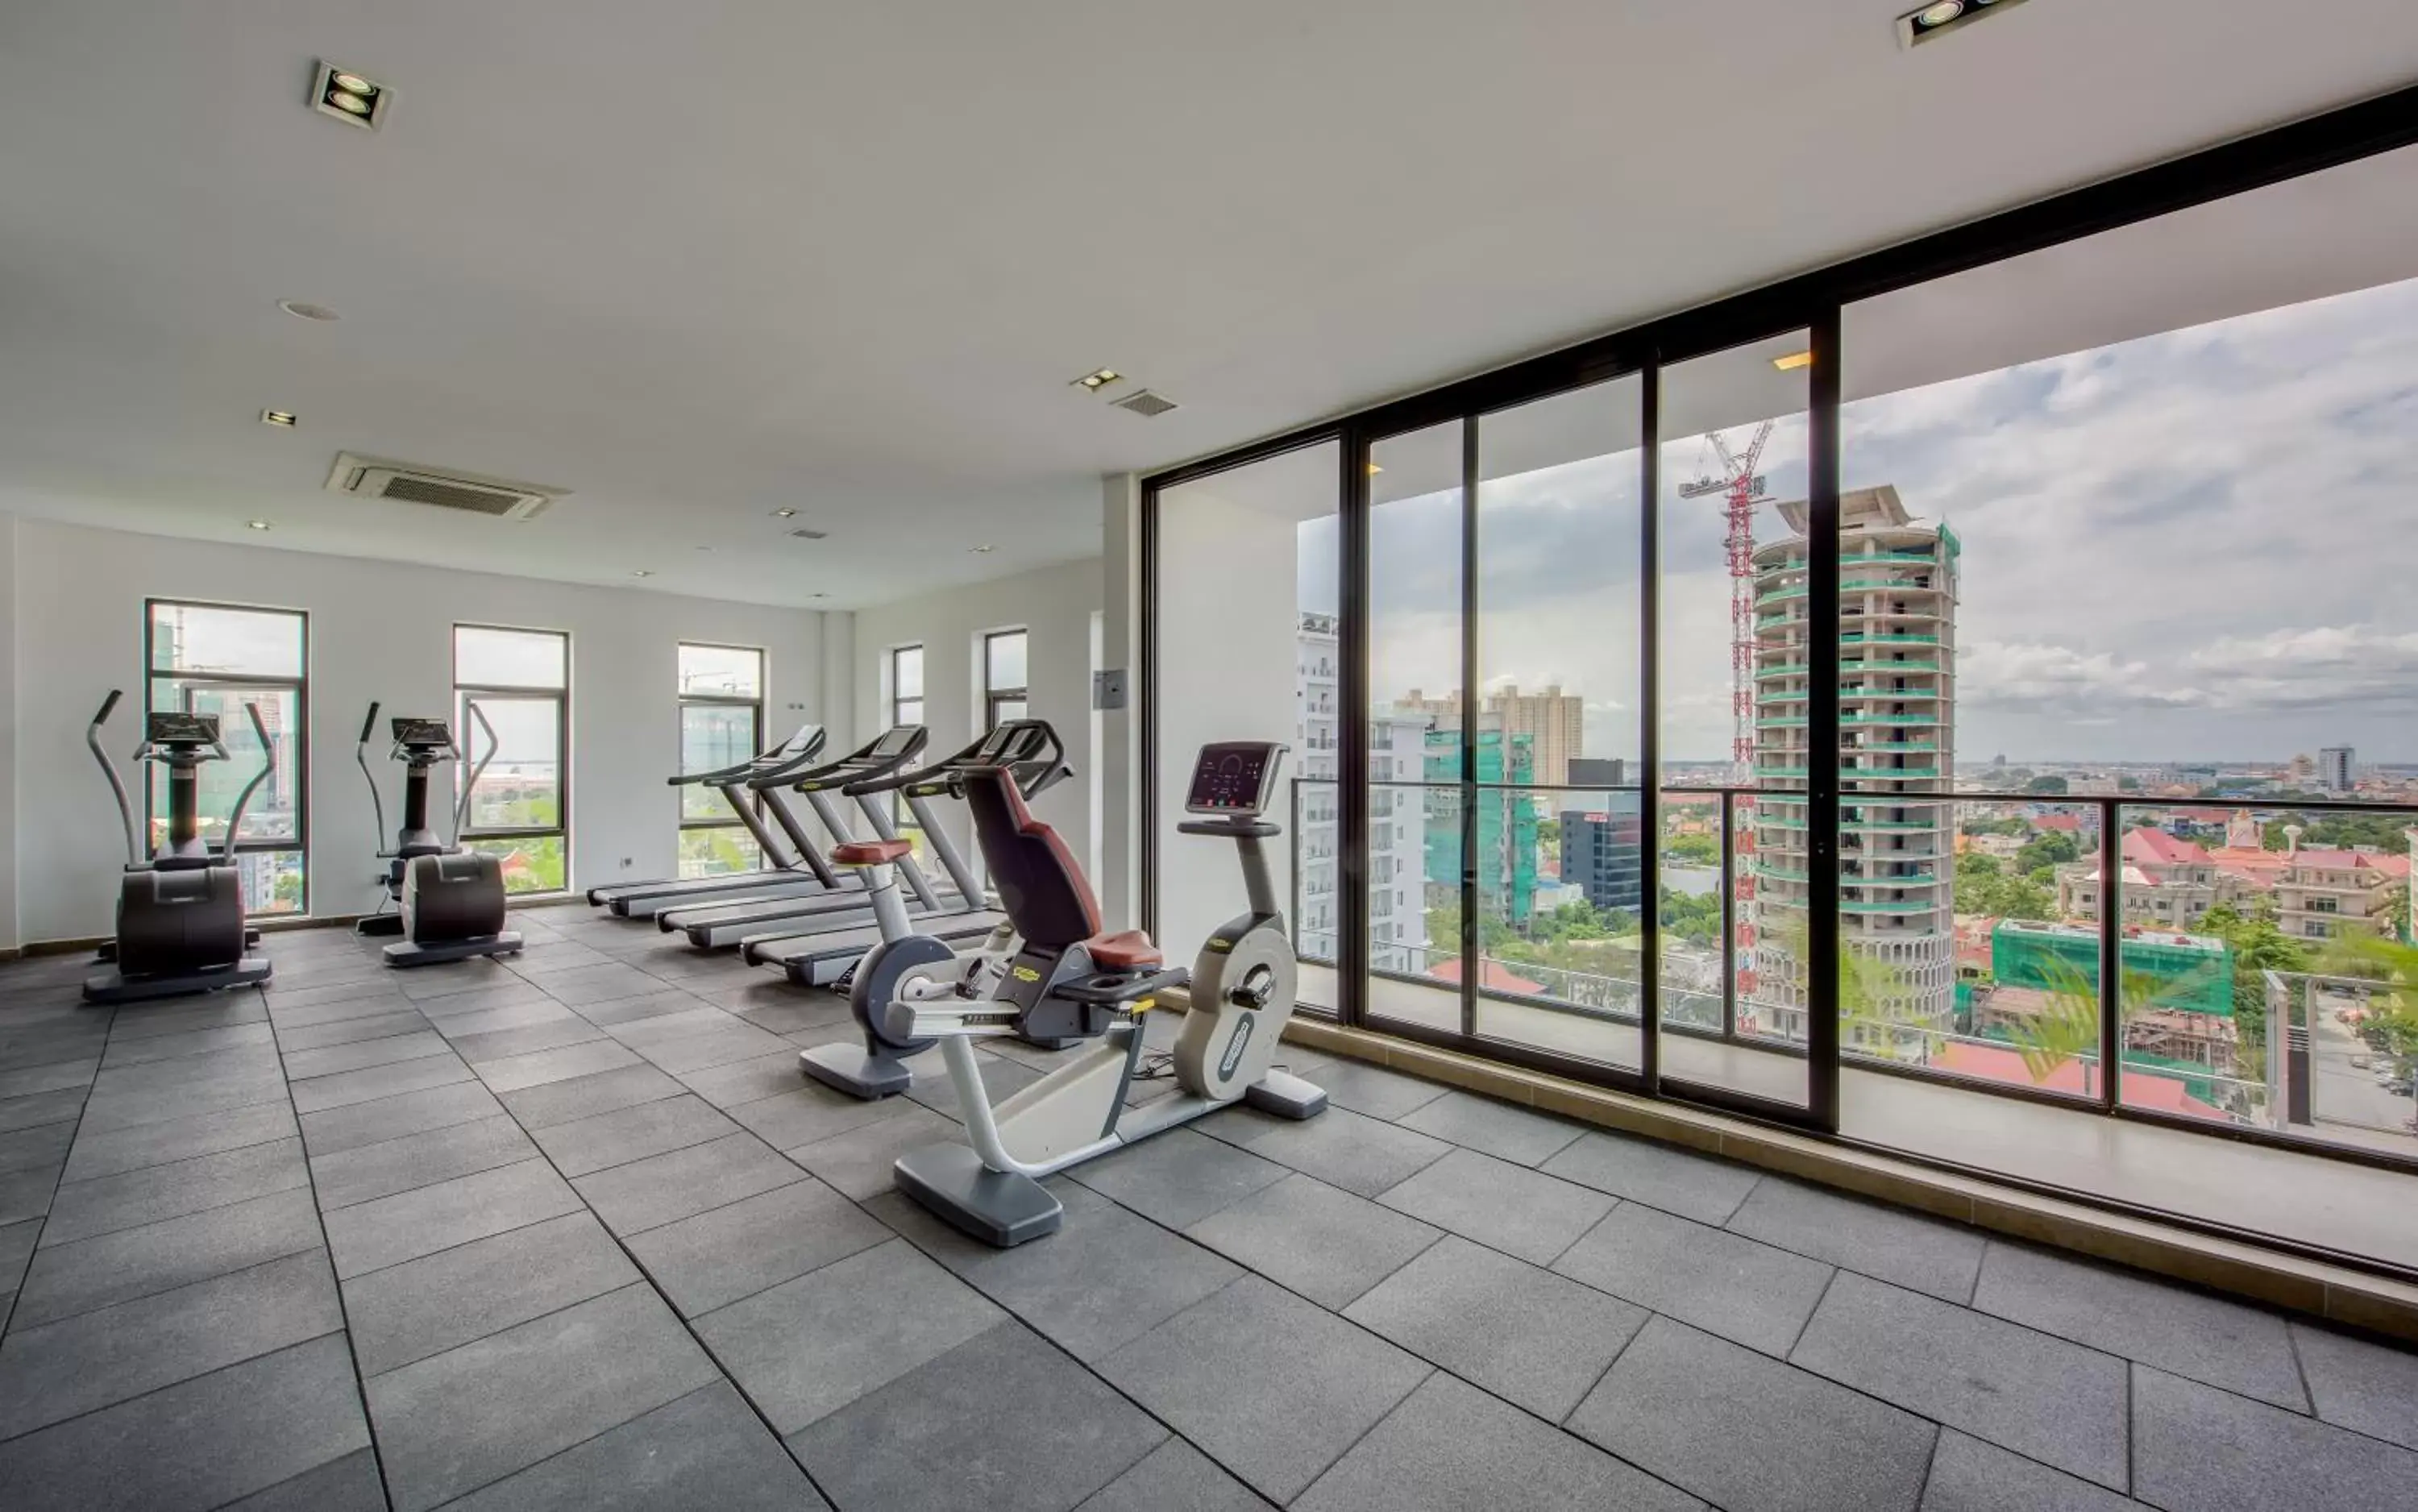 Fitness centre/facilities, Fitness Center/Facilities in Mansion 51 Hotel & Apartment